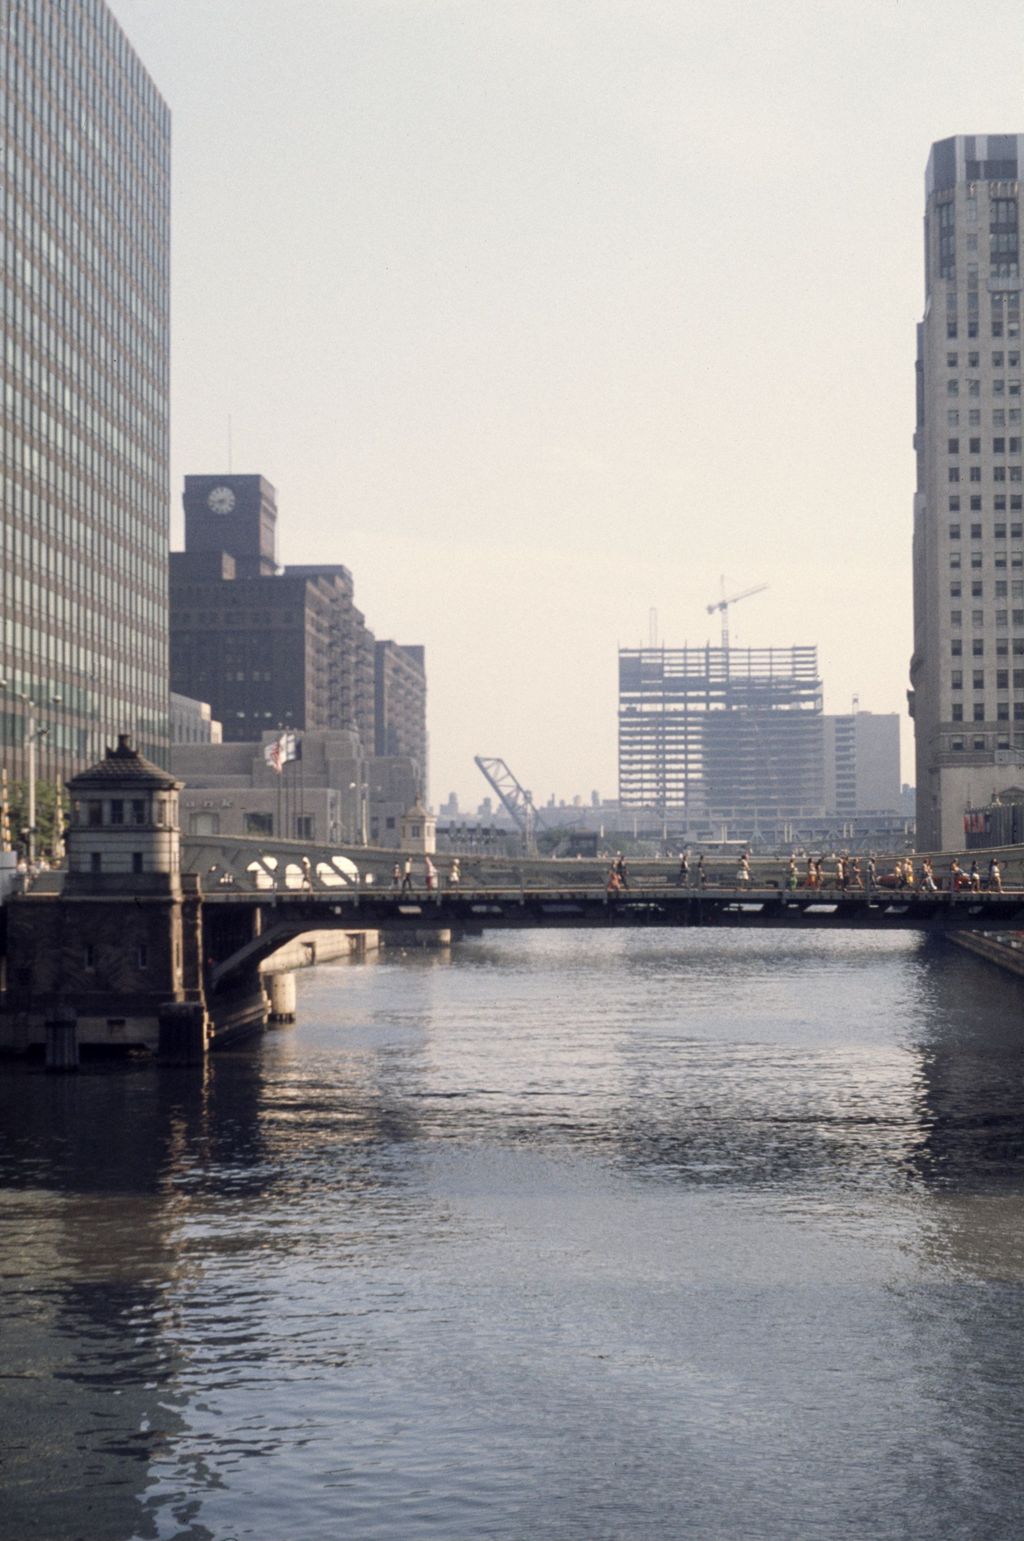 Miniature of Chicago River and Apparel Center construction